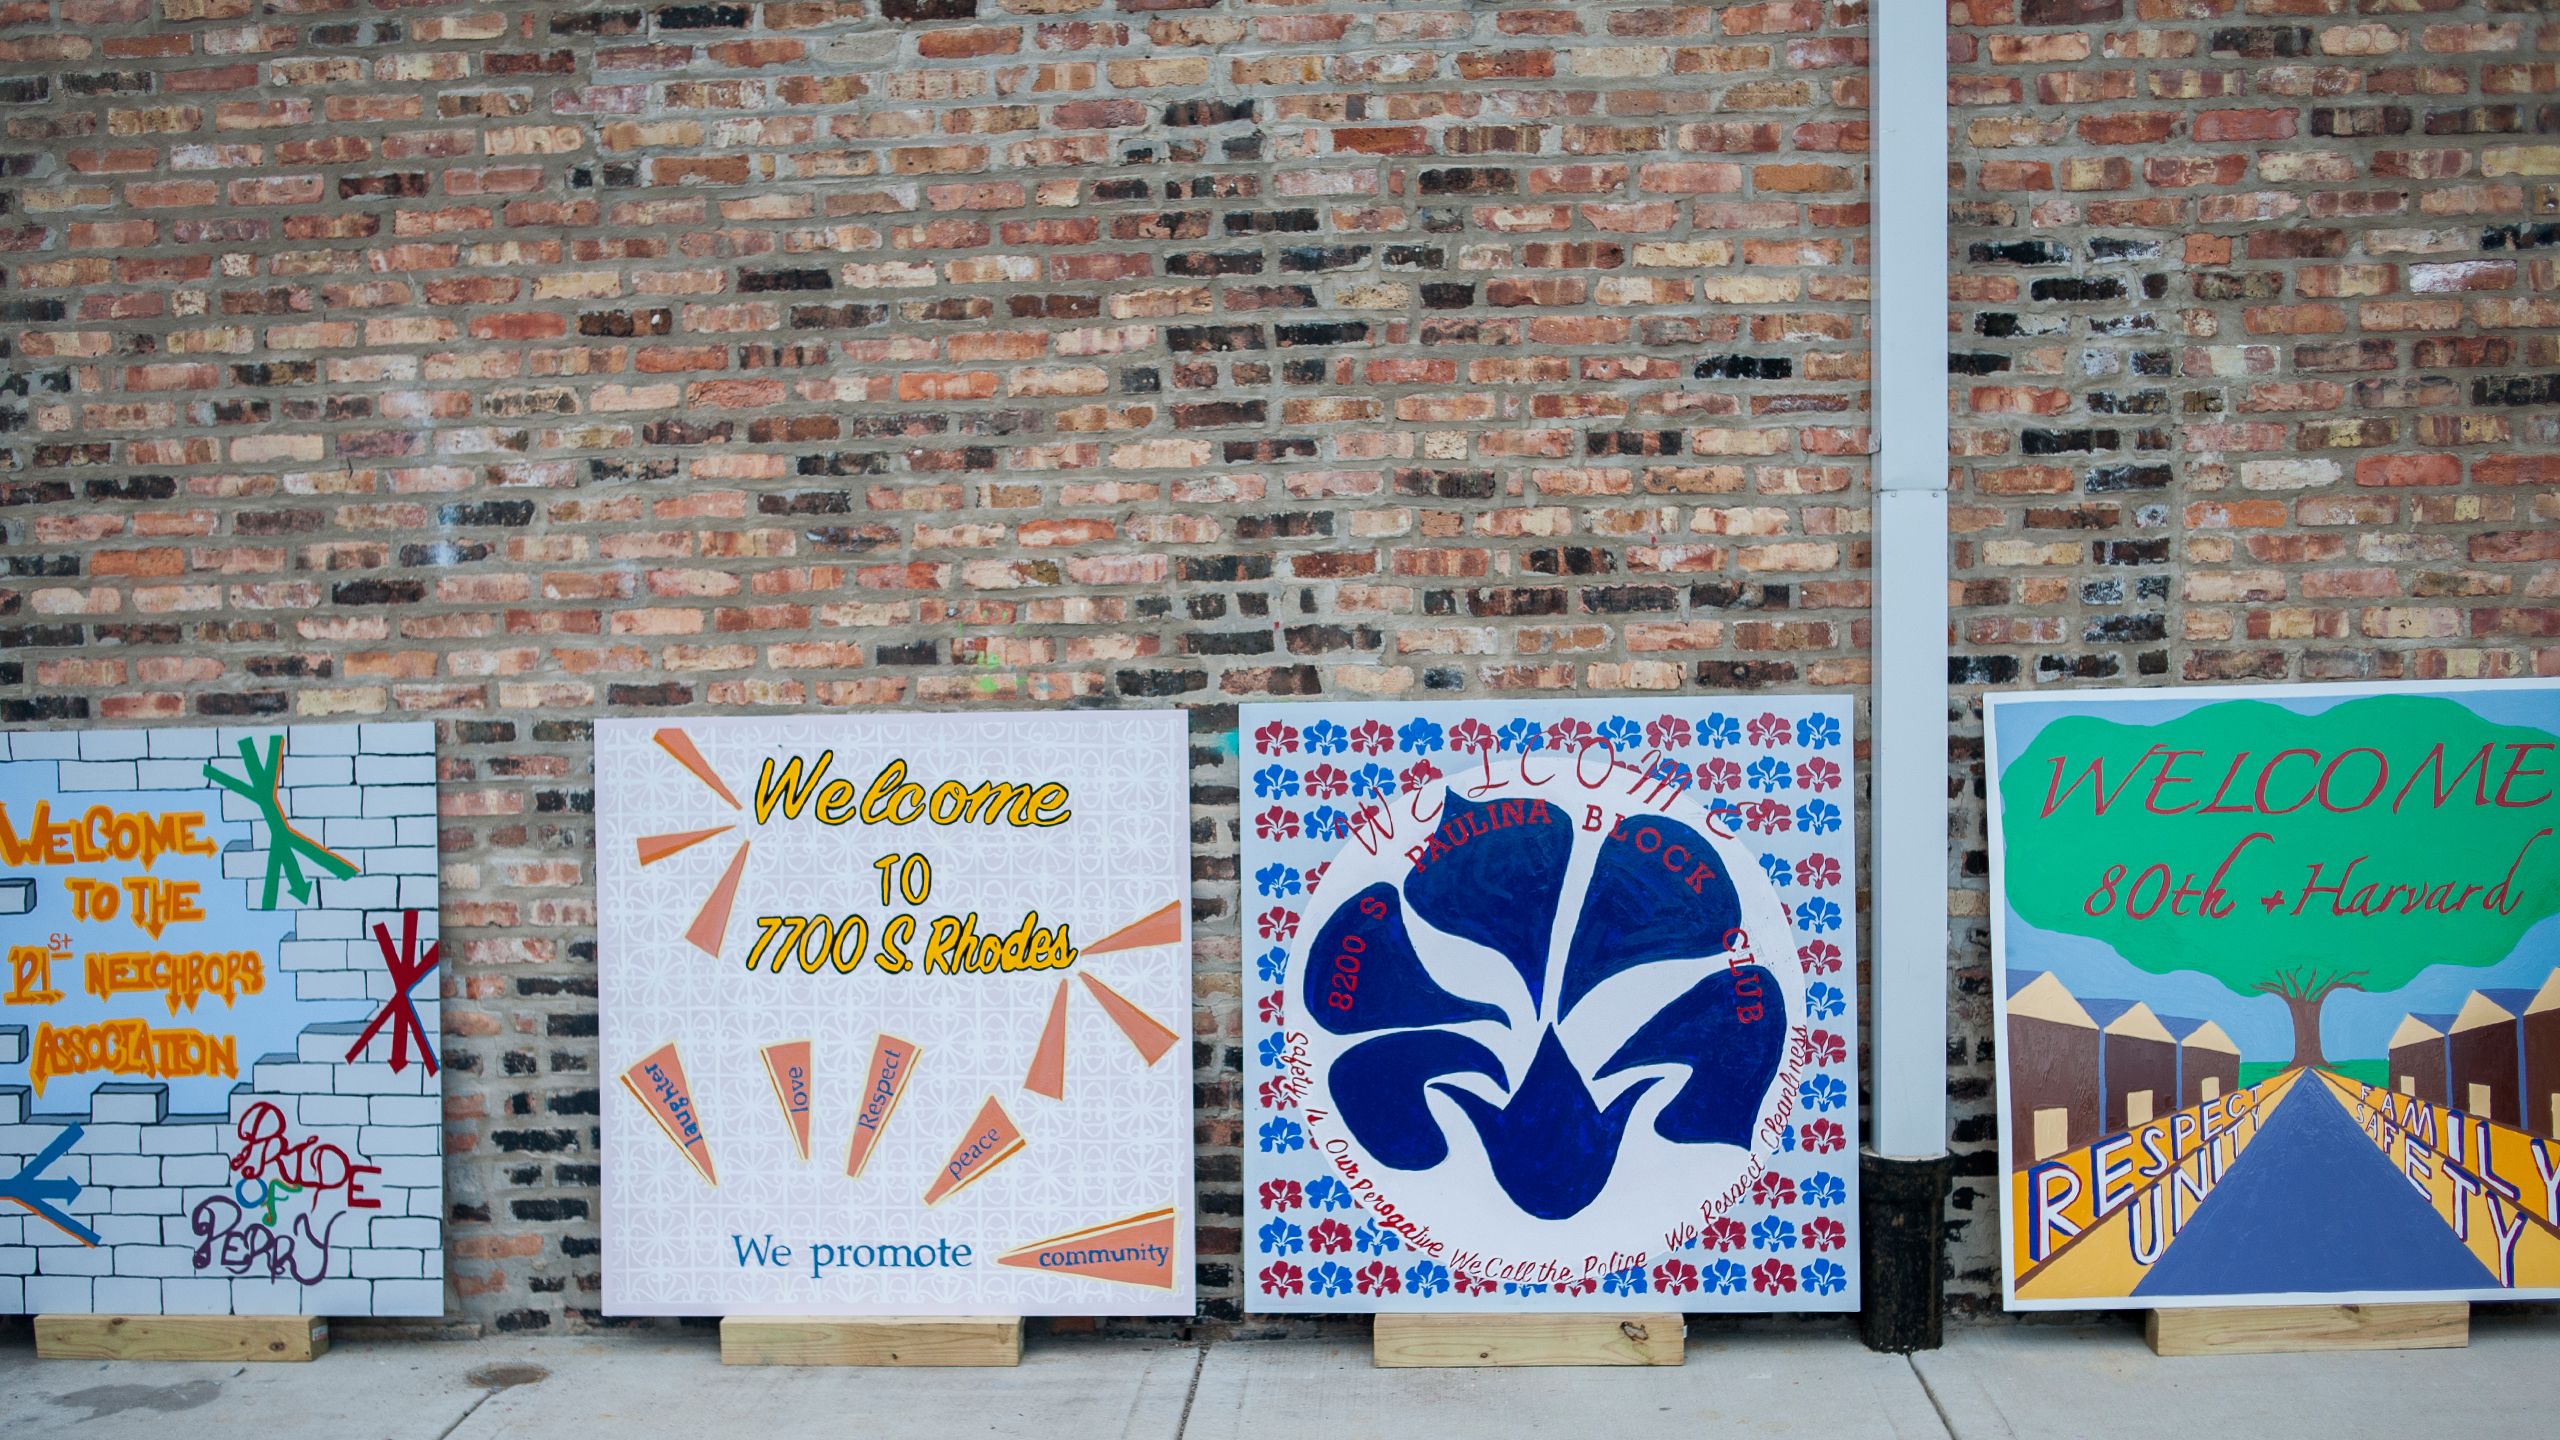 Colorful square signs with messages like "Welcome to 7700 S. Rhodes" lean up against a brick wall